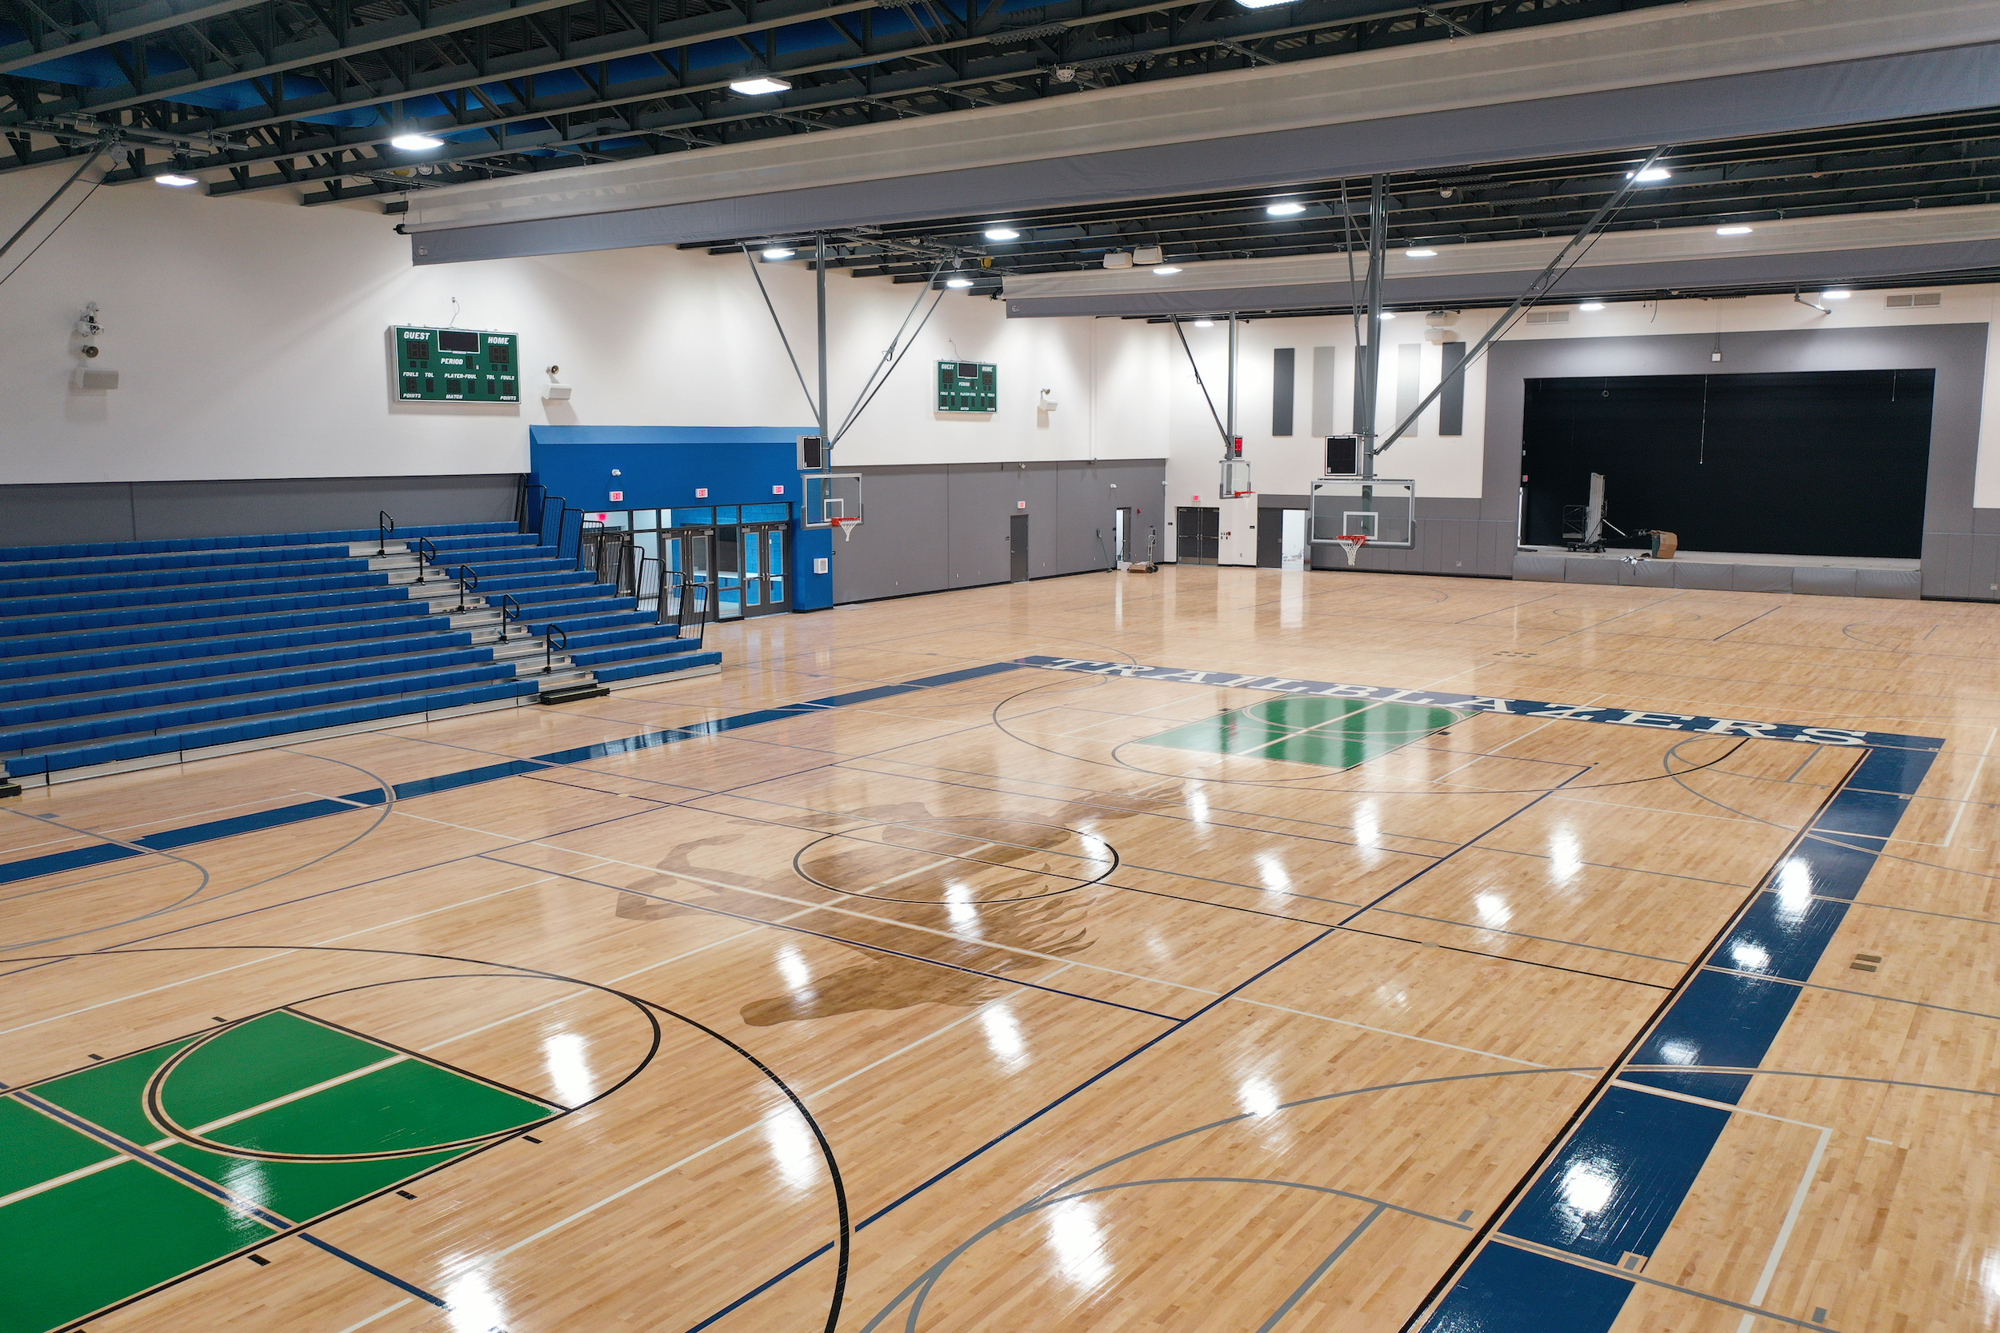 Babcock High School's spacious fieldhouse doubles as a performing arts venue and can also be used as an emergency shelter capable of withstanding a Category 5 hurricane. (Courtesy photo)